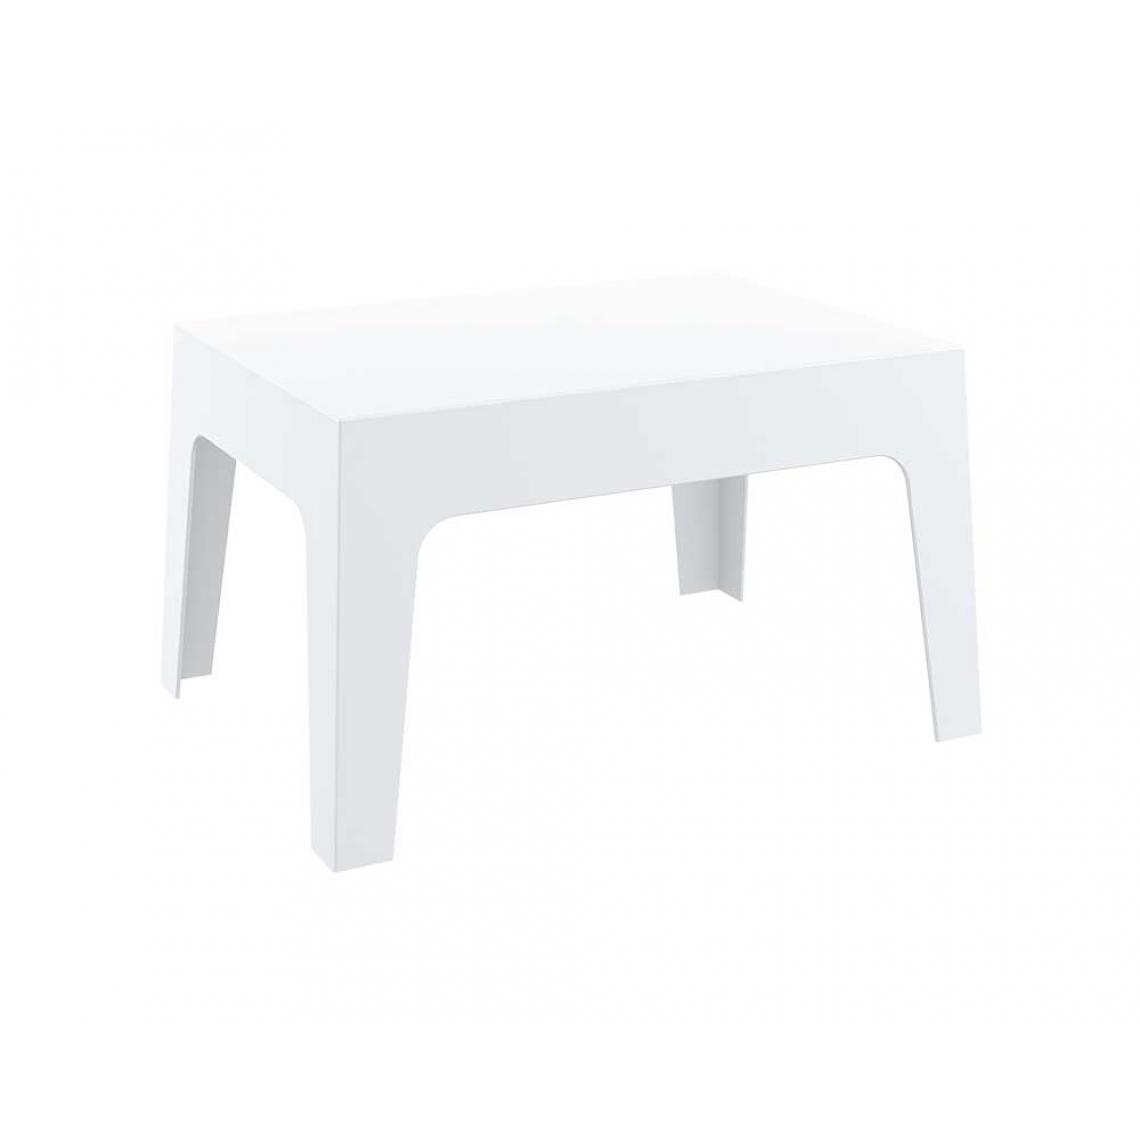 Icaverne - Admirable Table collection Dakar couleur blanc - Chaises